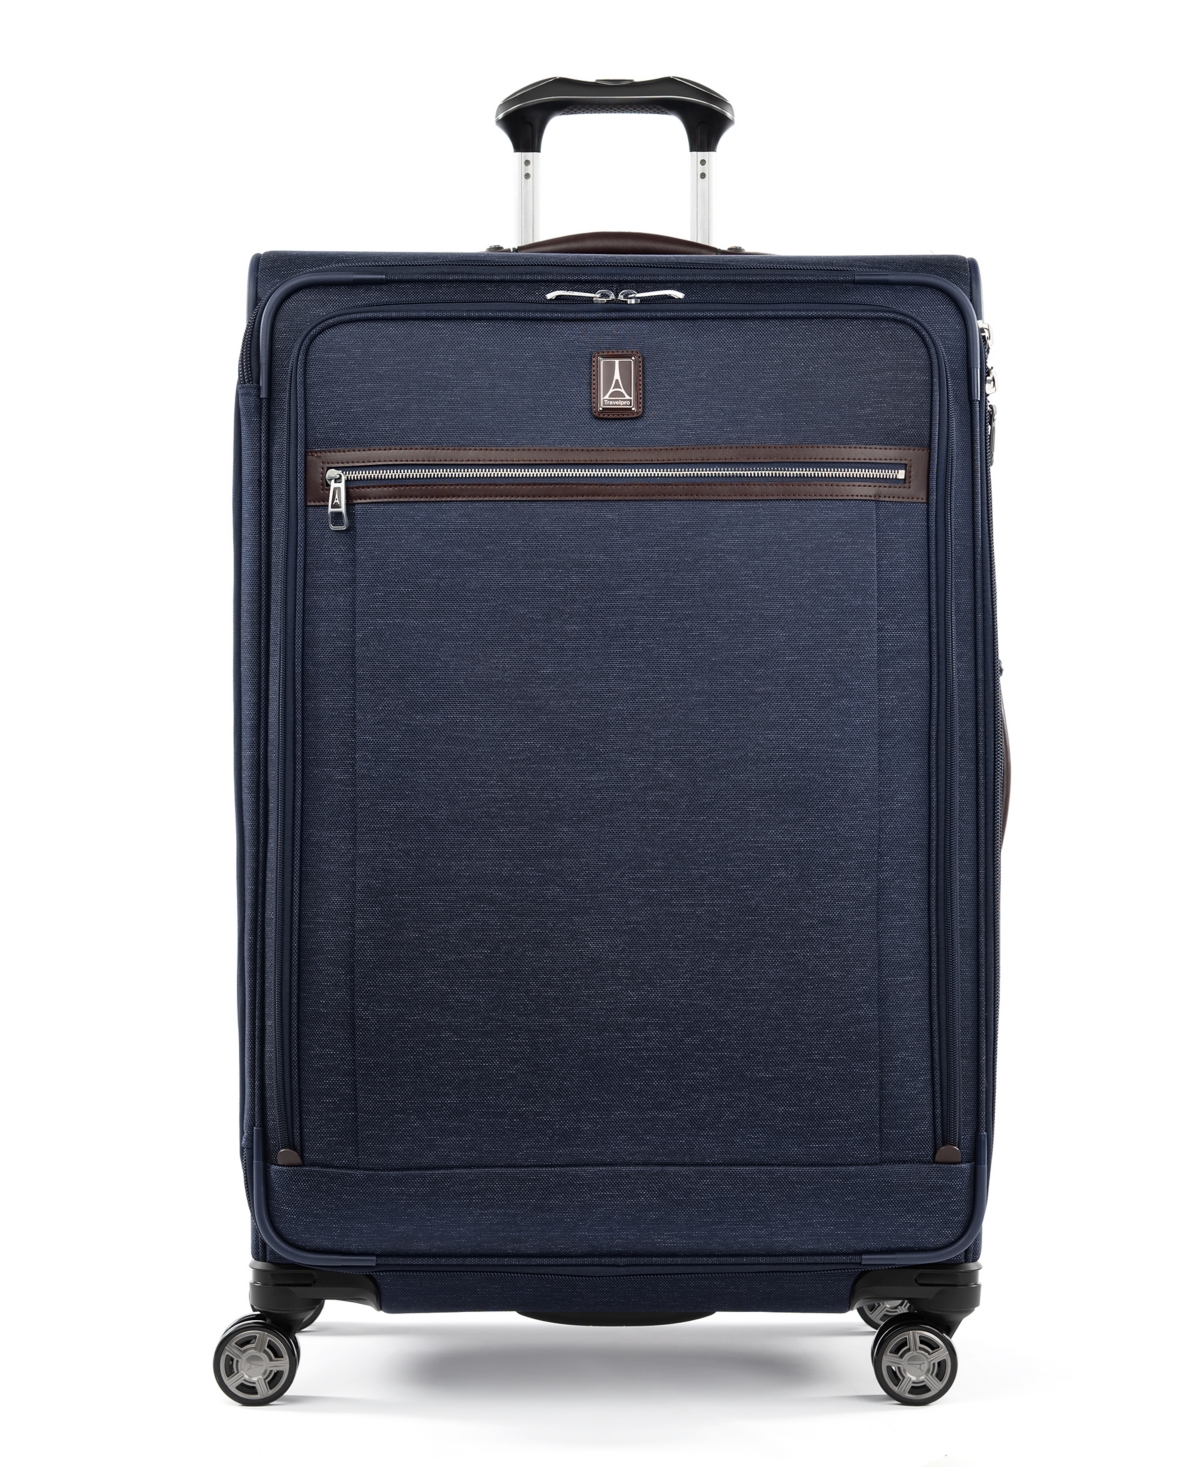 Platinum Elite Limited Edition 29" Softside Check-In Luggage - Limited Edition True Navy